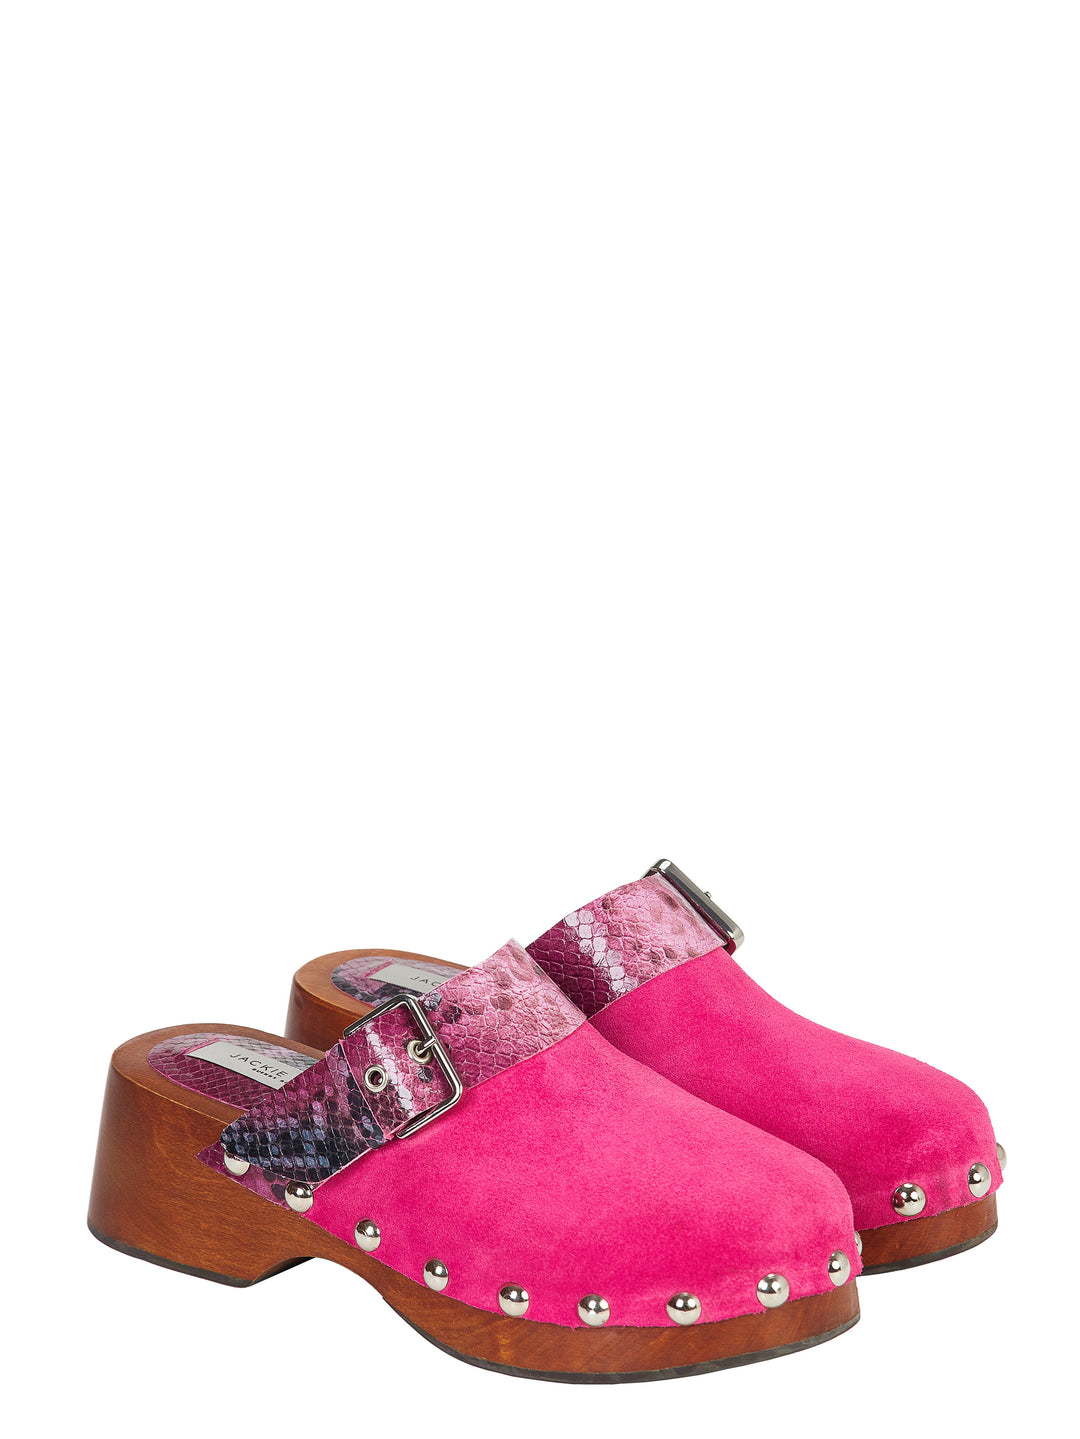 Limited Edition Suede Clogs